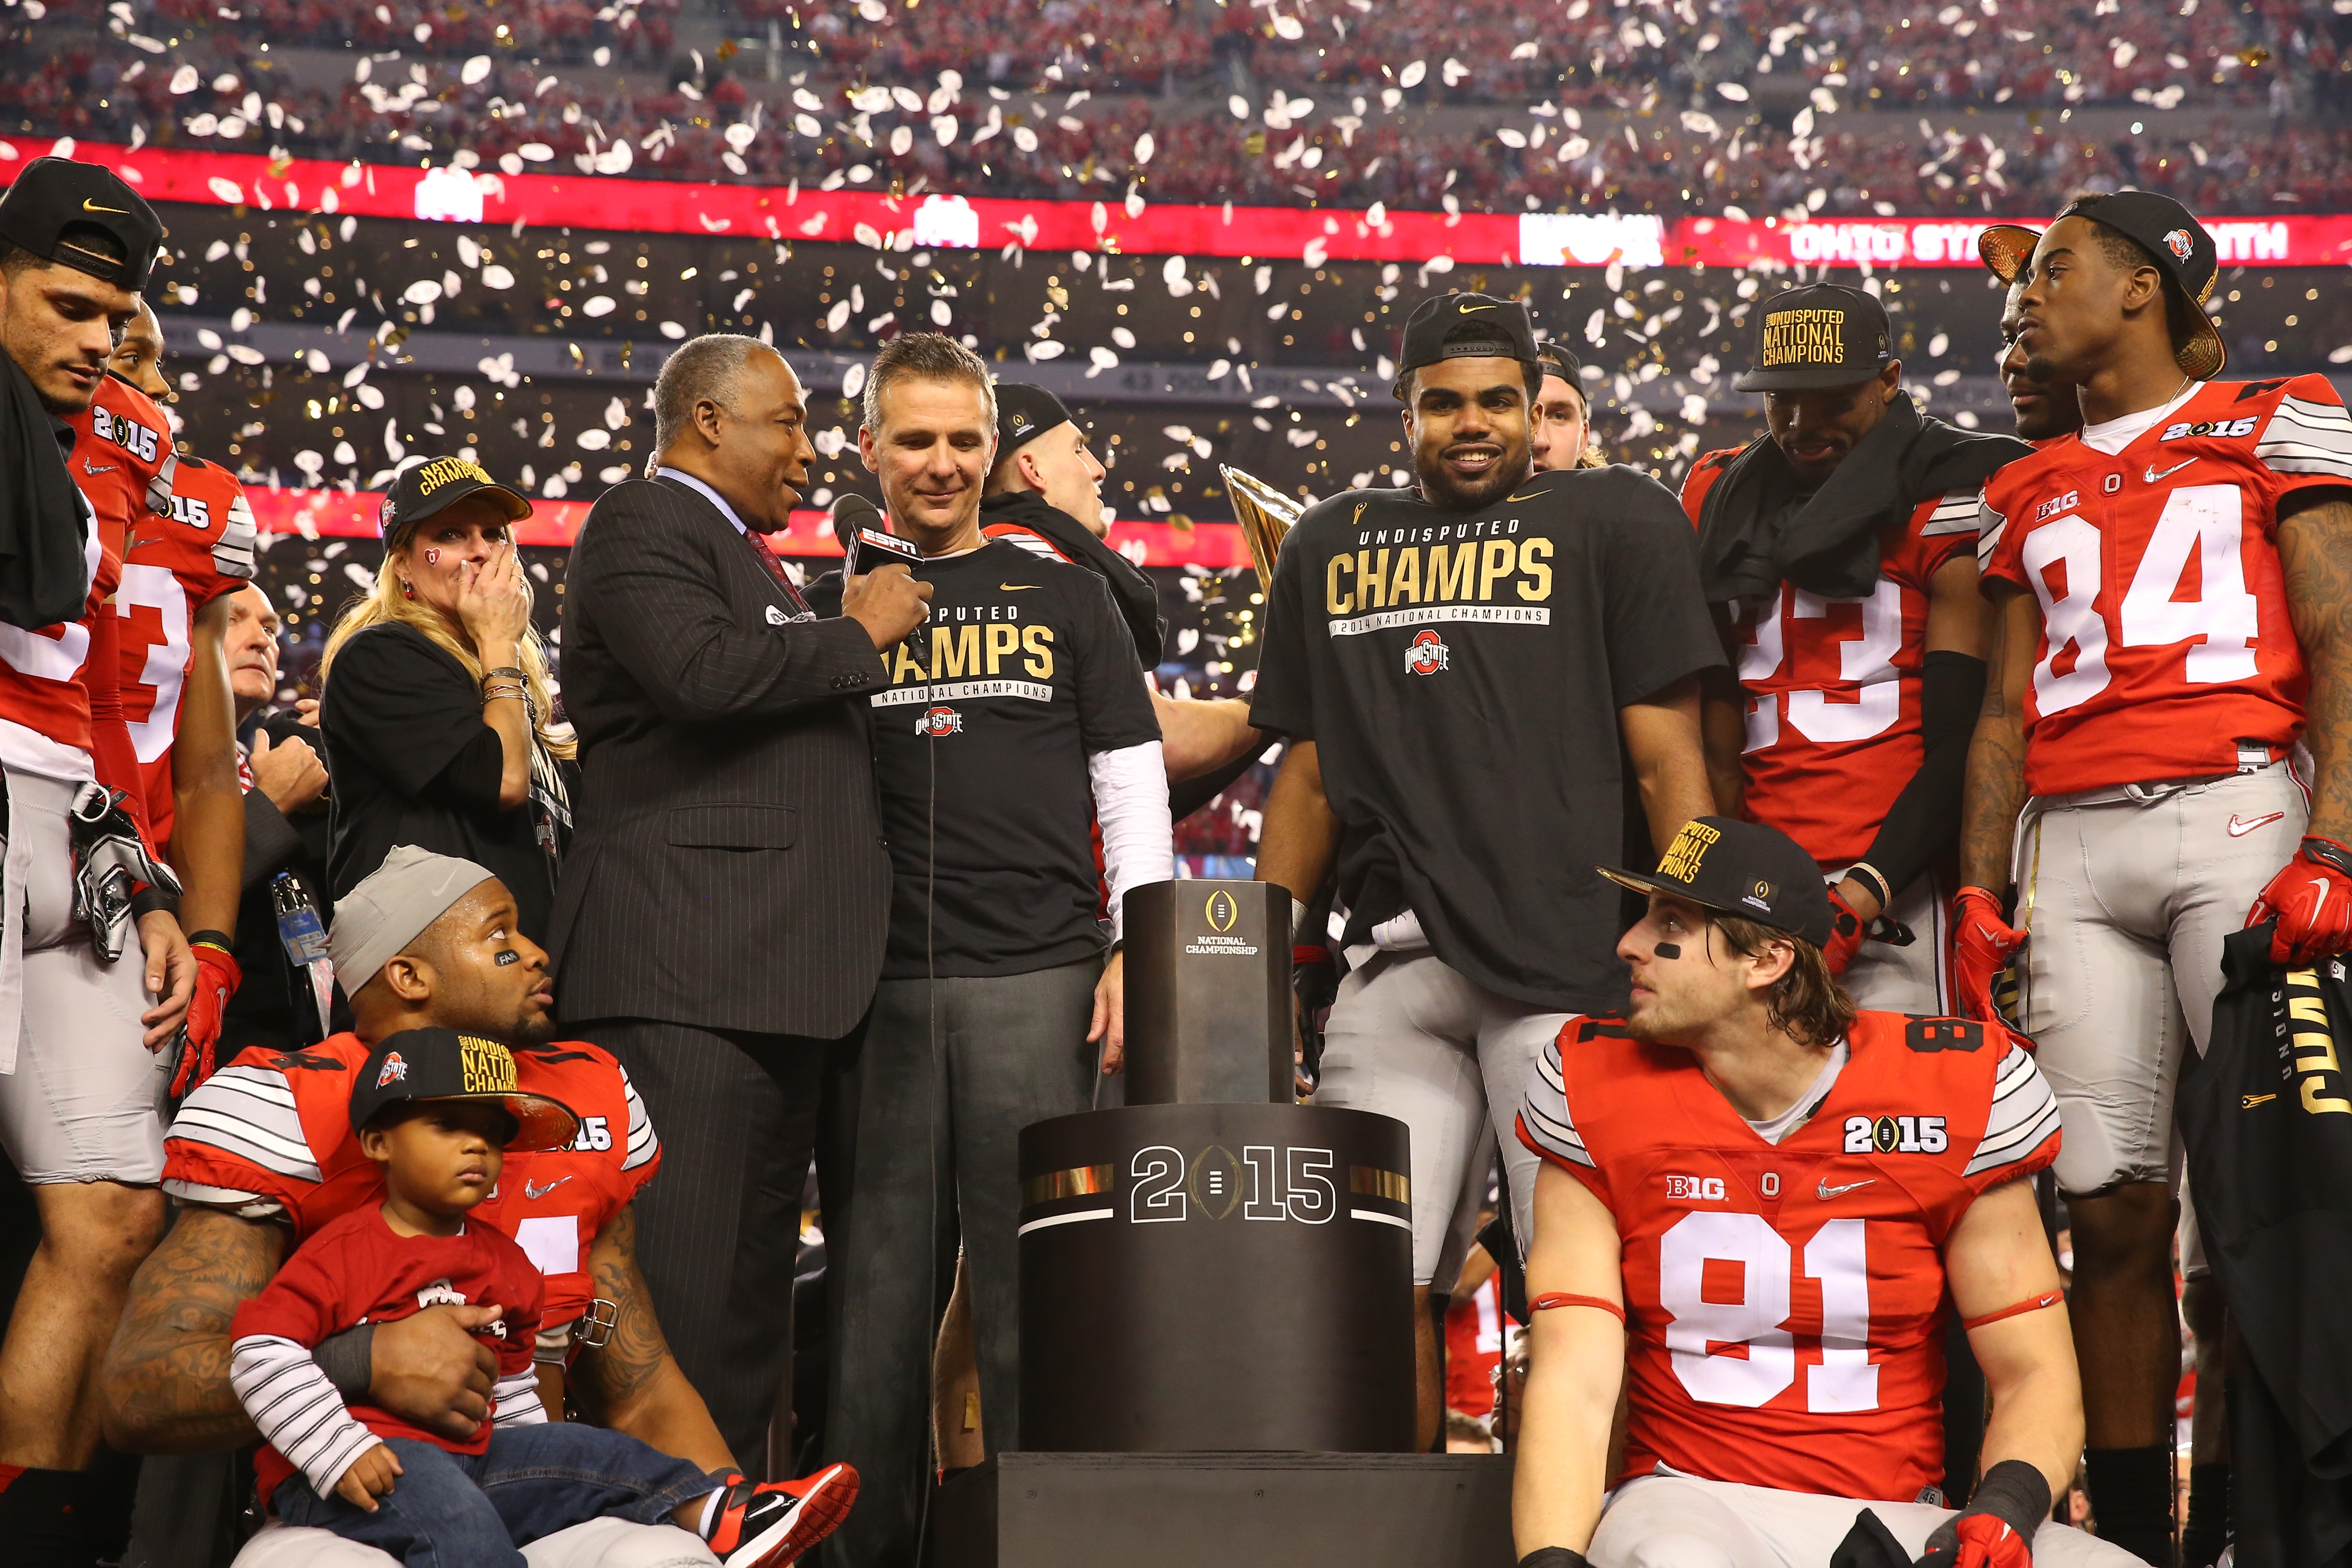 John Saunders and Ohio State Coach Urban Meyer after the 2015 College Football Playoff National Championship. (Allen Kee/ESPN Images)